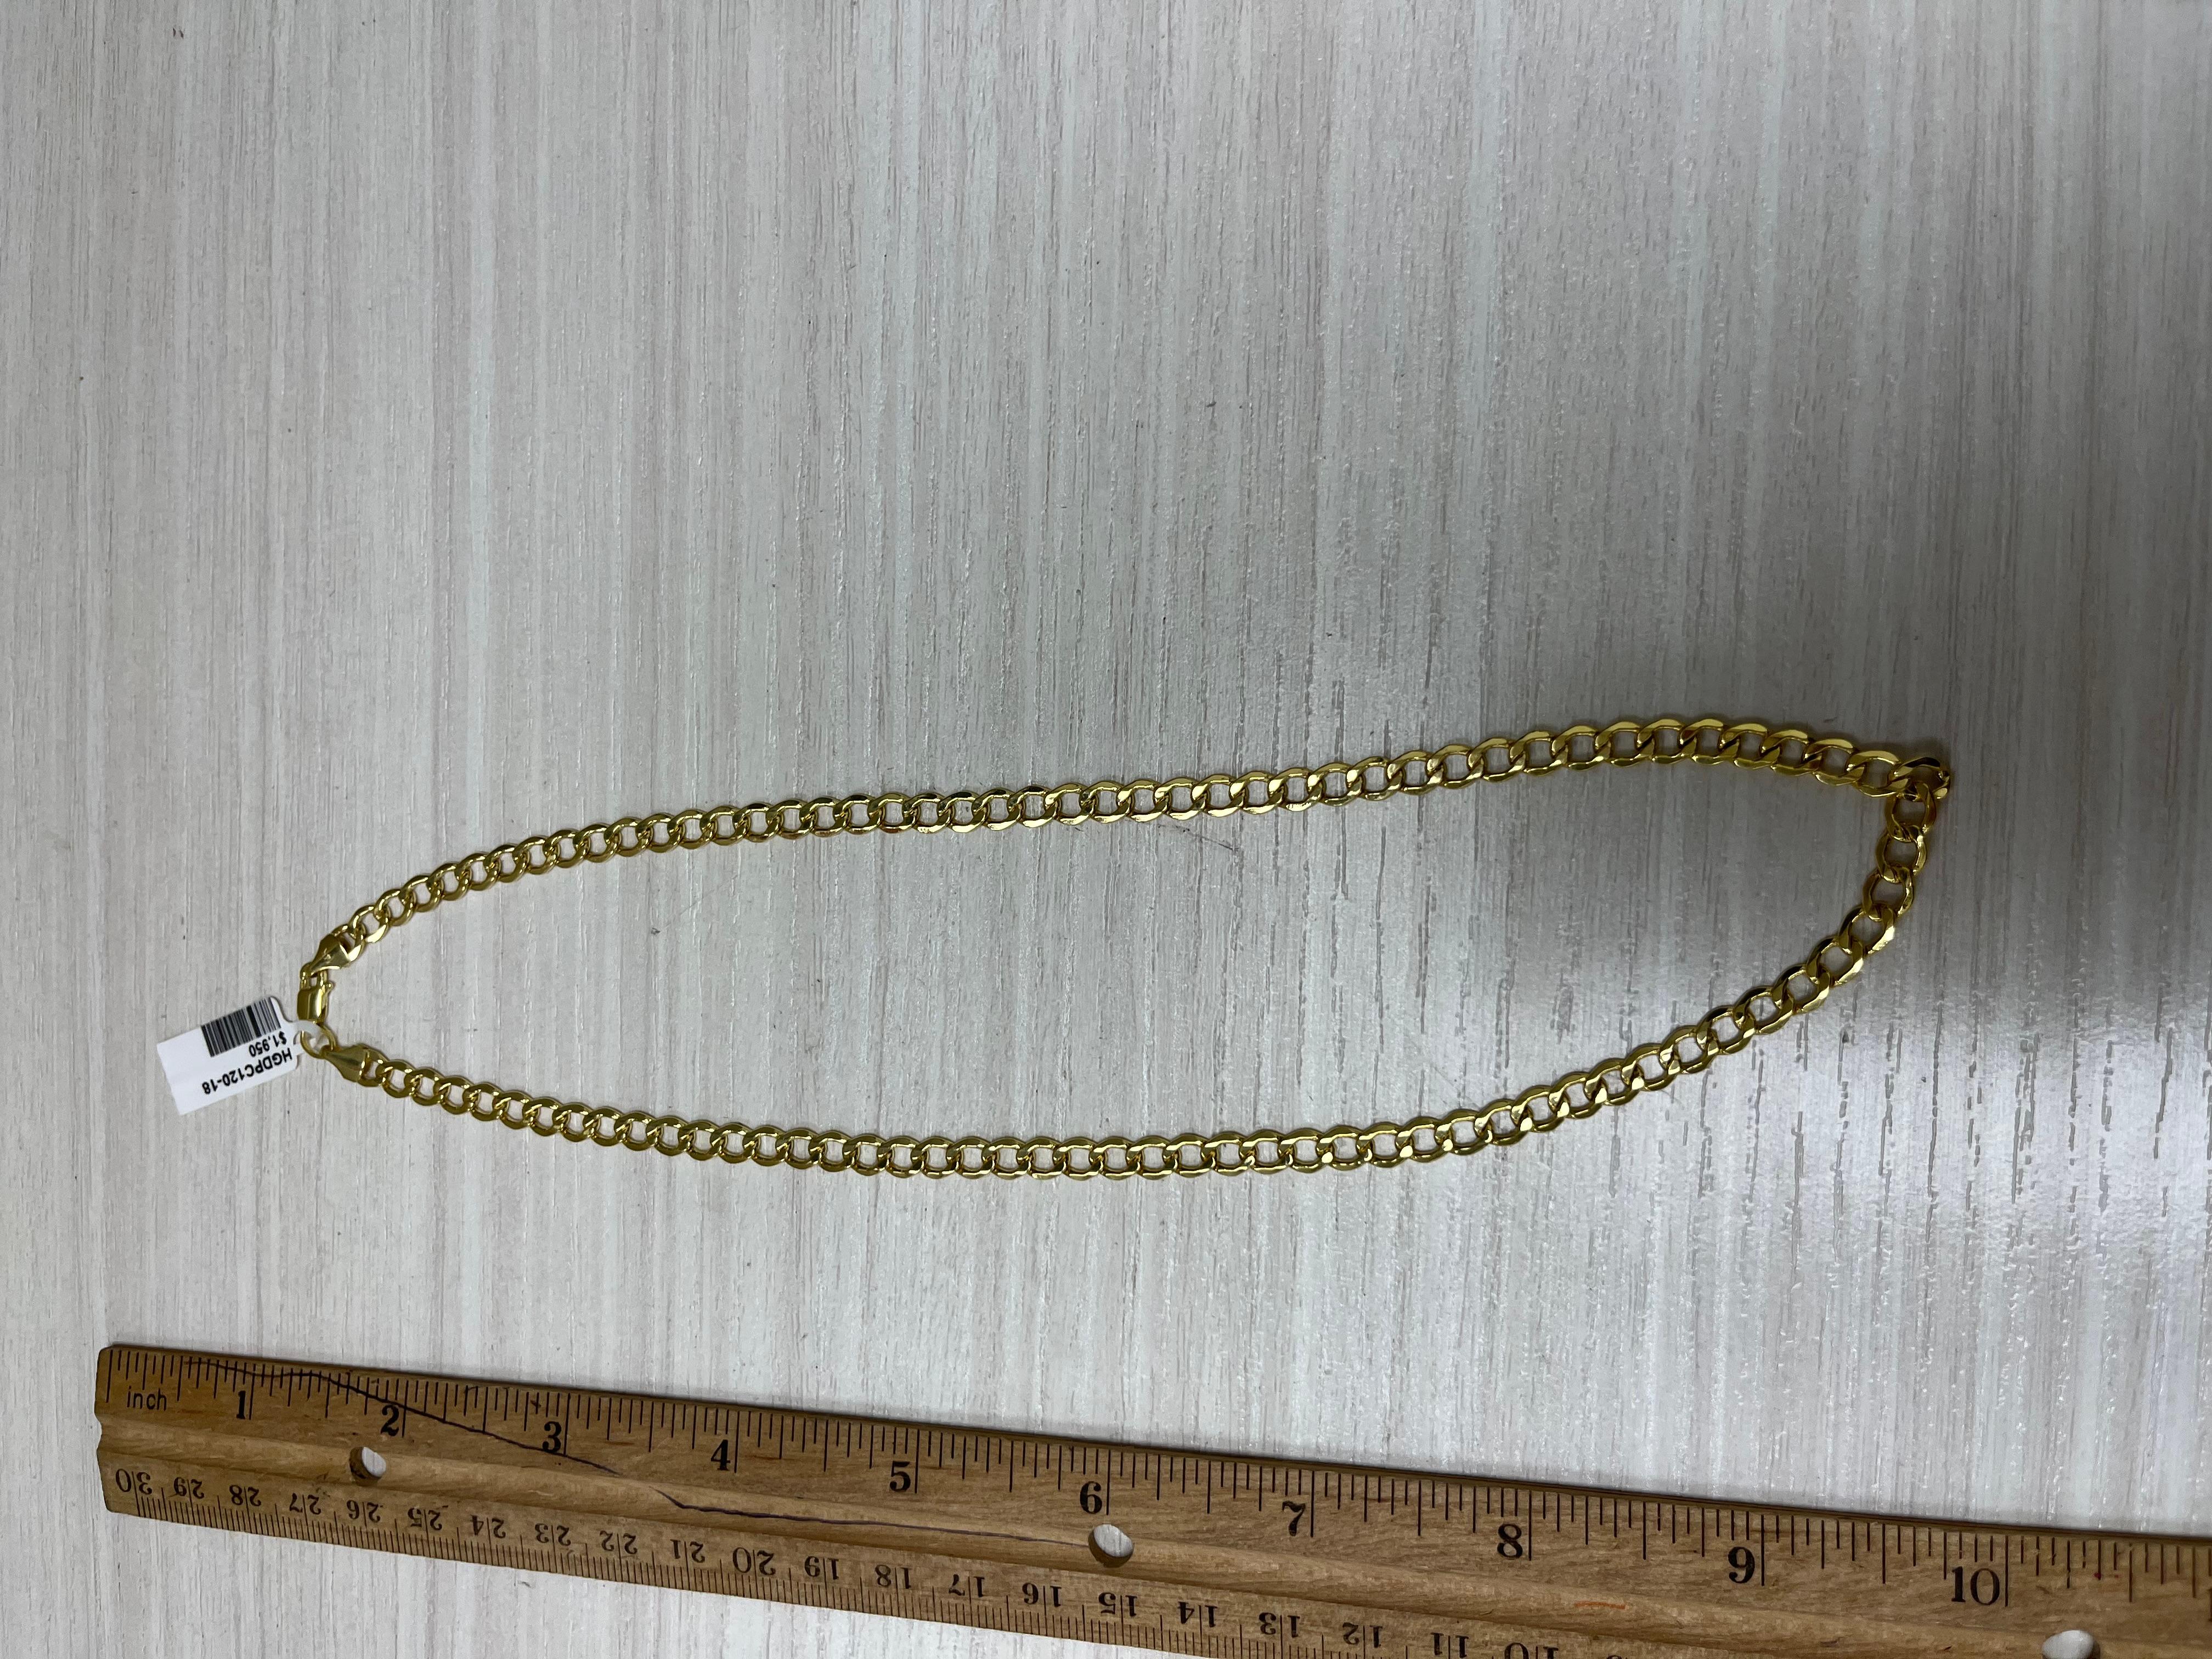 14K Gold Flat Hollow Curb Link Necklace in 18 inches.

This piece is perfect for everyday wear and makes the perfect Gift! 

We certify that this is an authentic piece of Fine jewelry. Every piece is crafted with the utmost care and precision. You